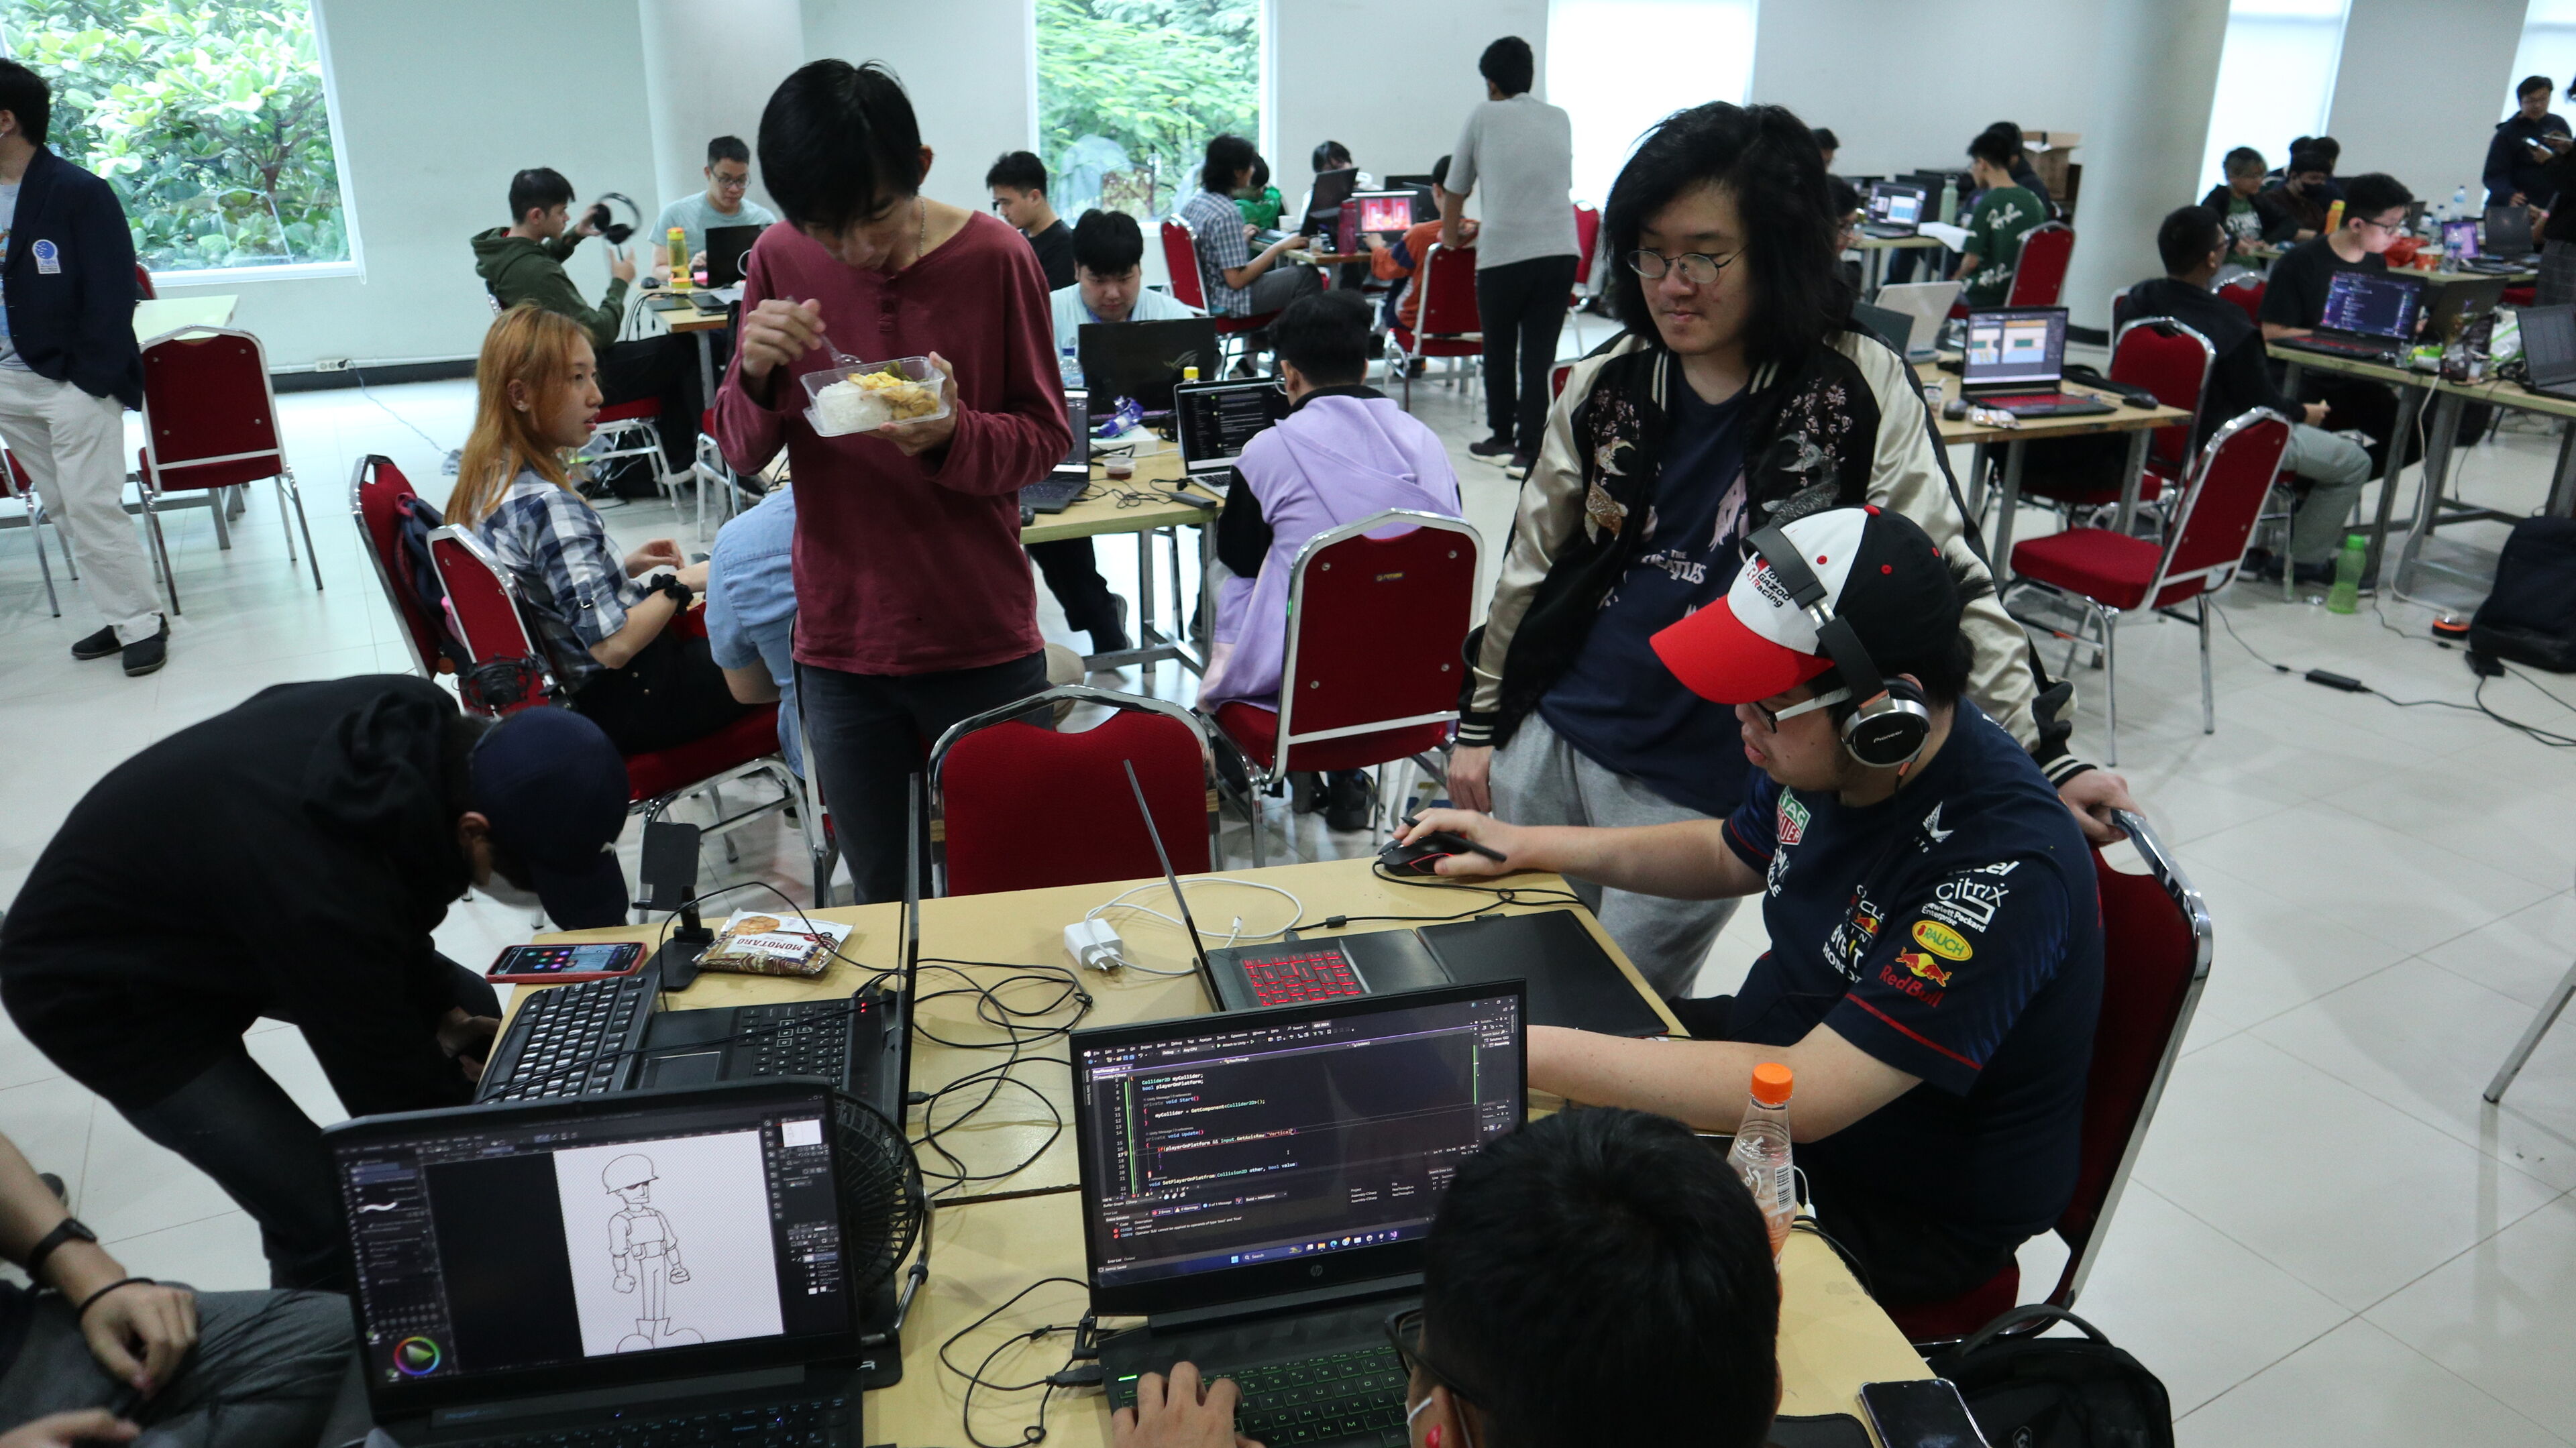 Participants are deeply engaged in programming at a hackathon event, with laptops and screens displaying code in a busy hall.

